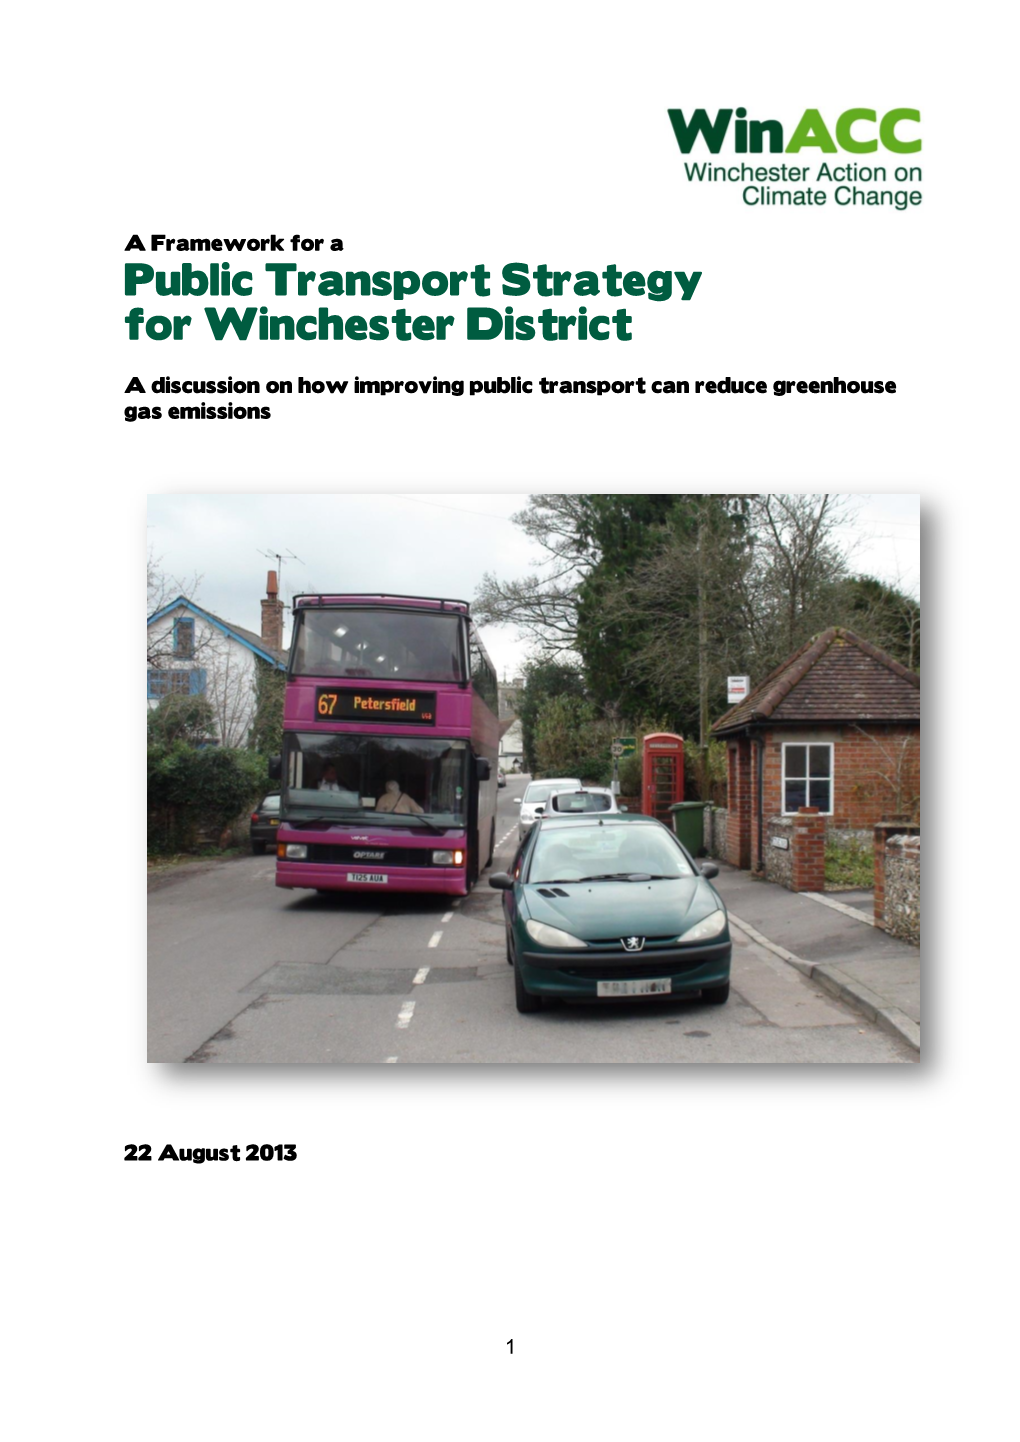 Public Transport Strategy for Winchester District